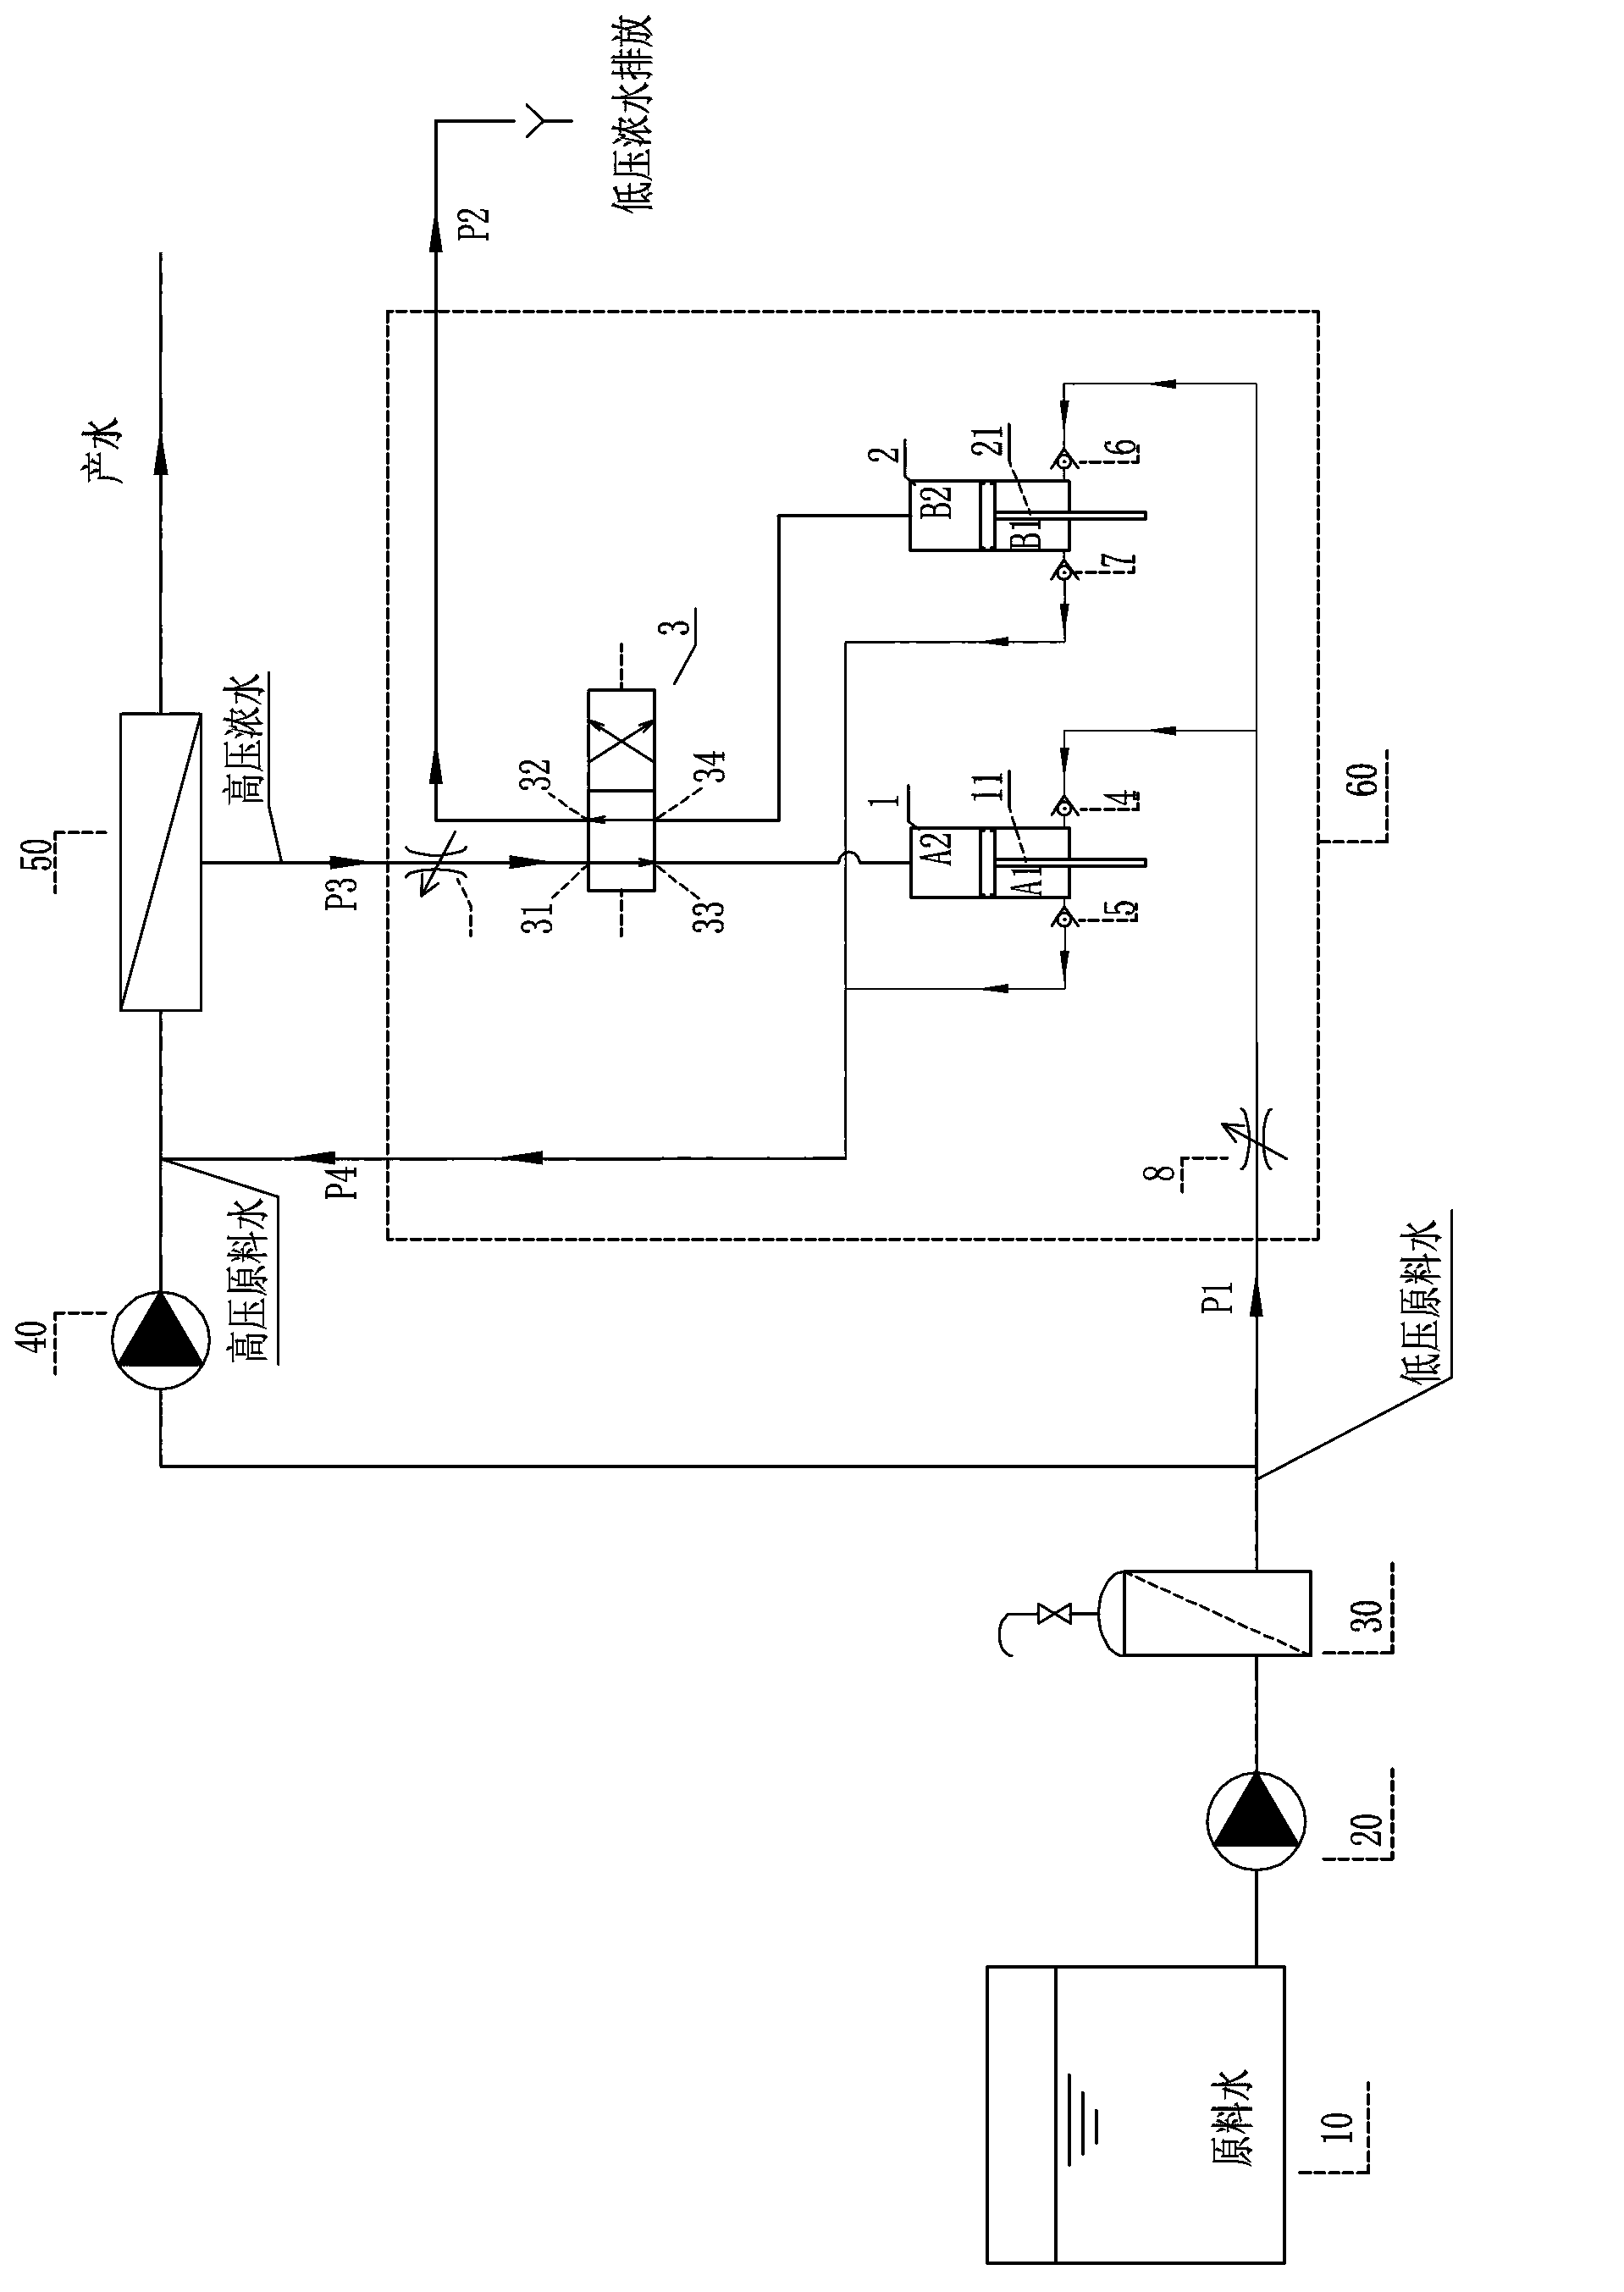 Differential pressure booster-type energy recovery device based on reverse osmosis system